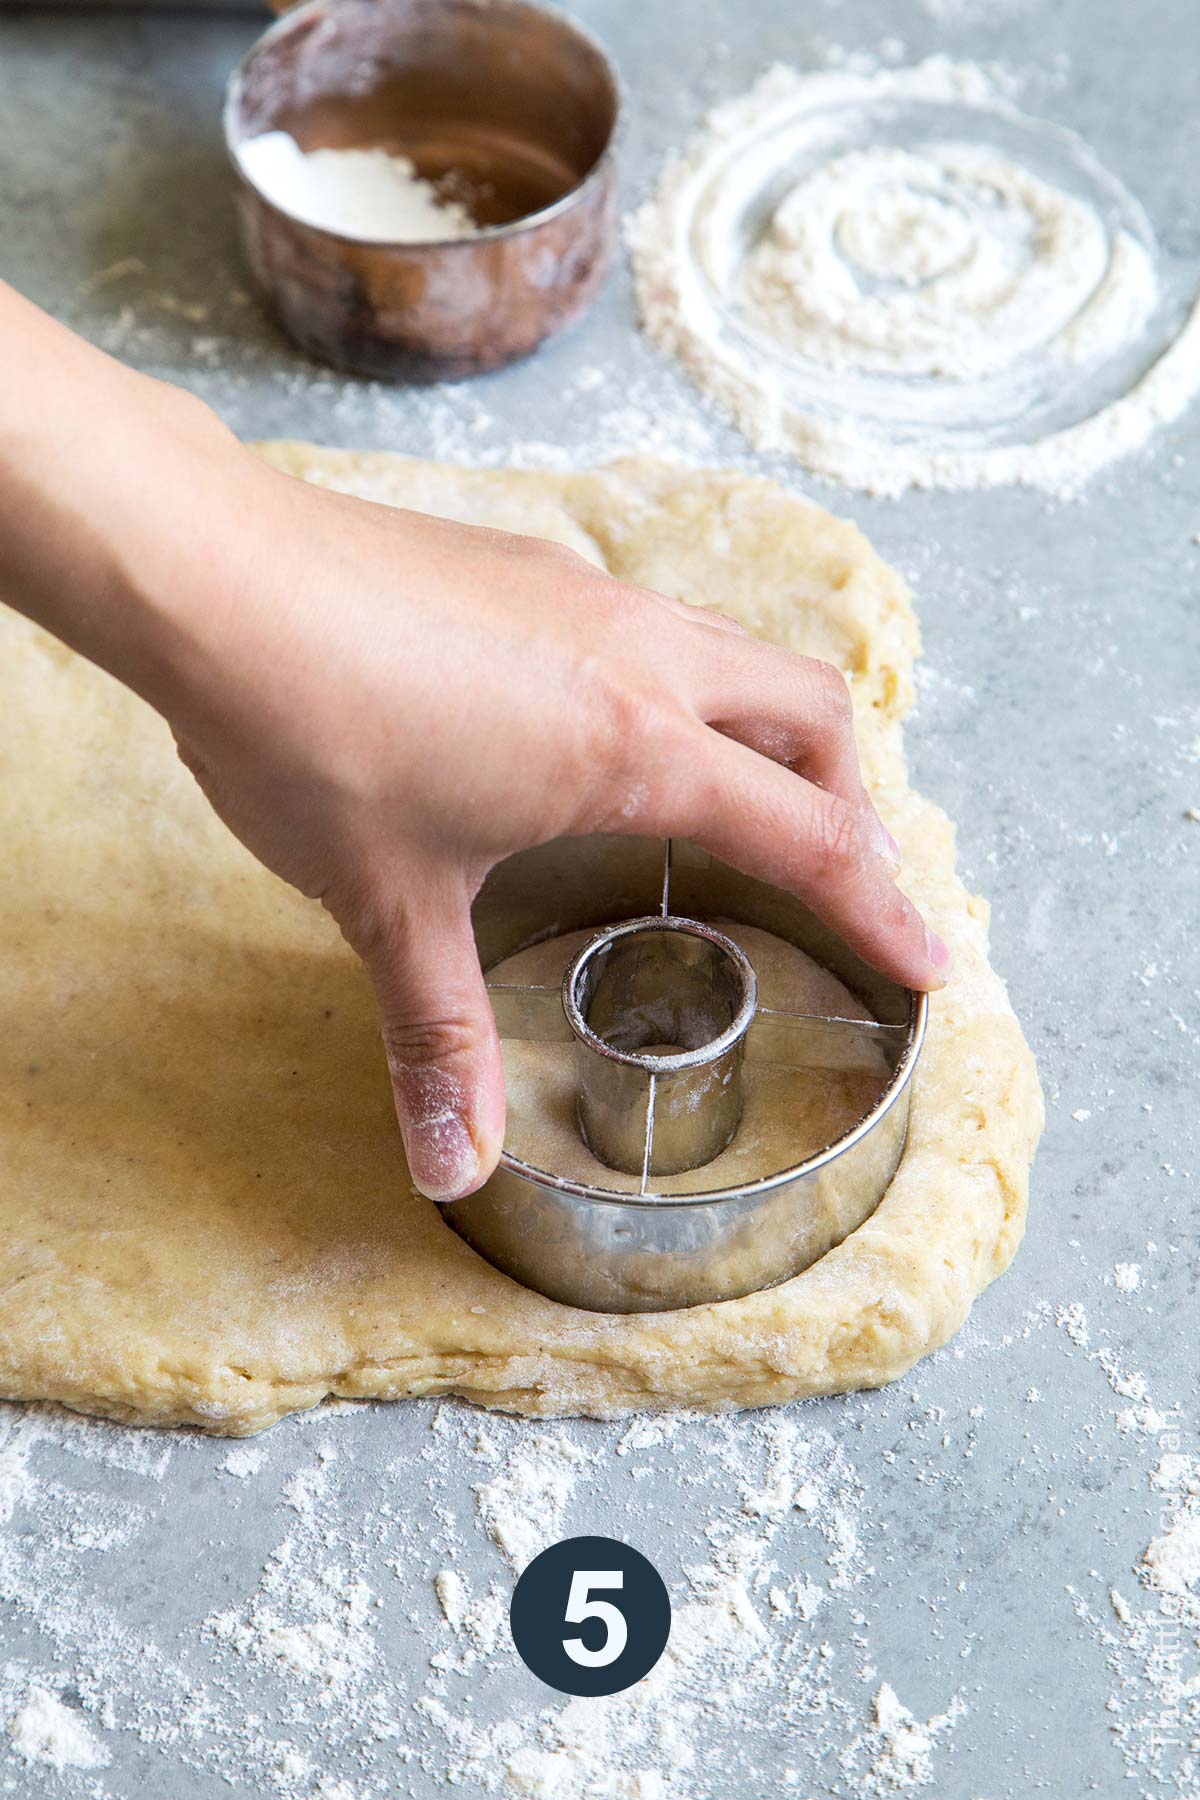 pat chilled dough to even layer and stamp out donut rounds.